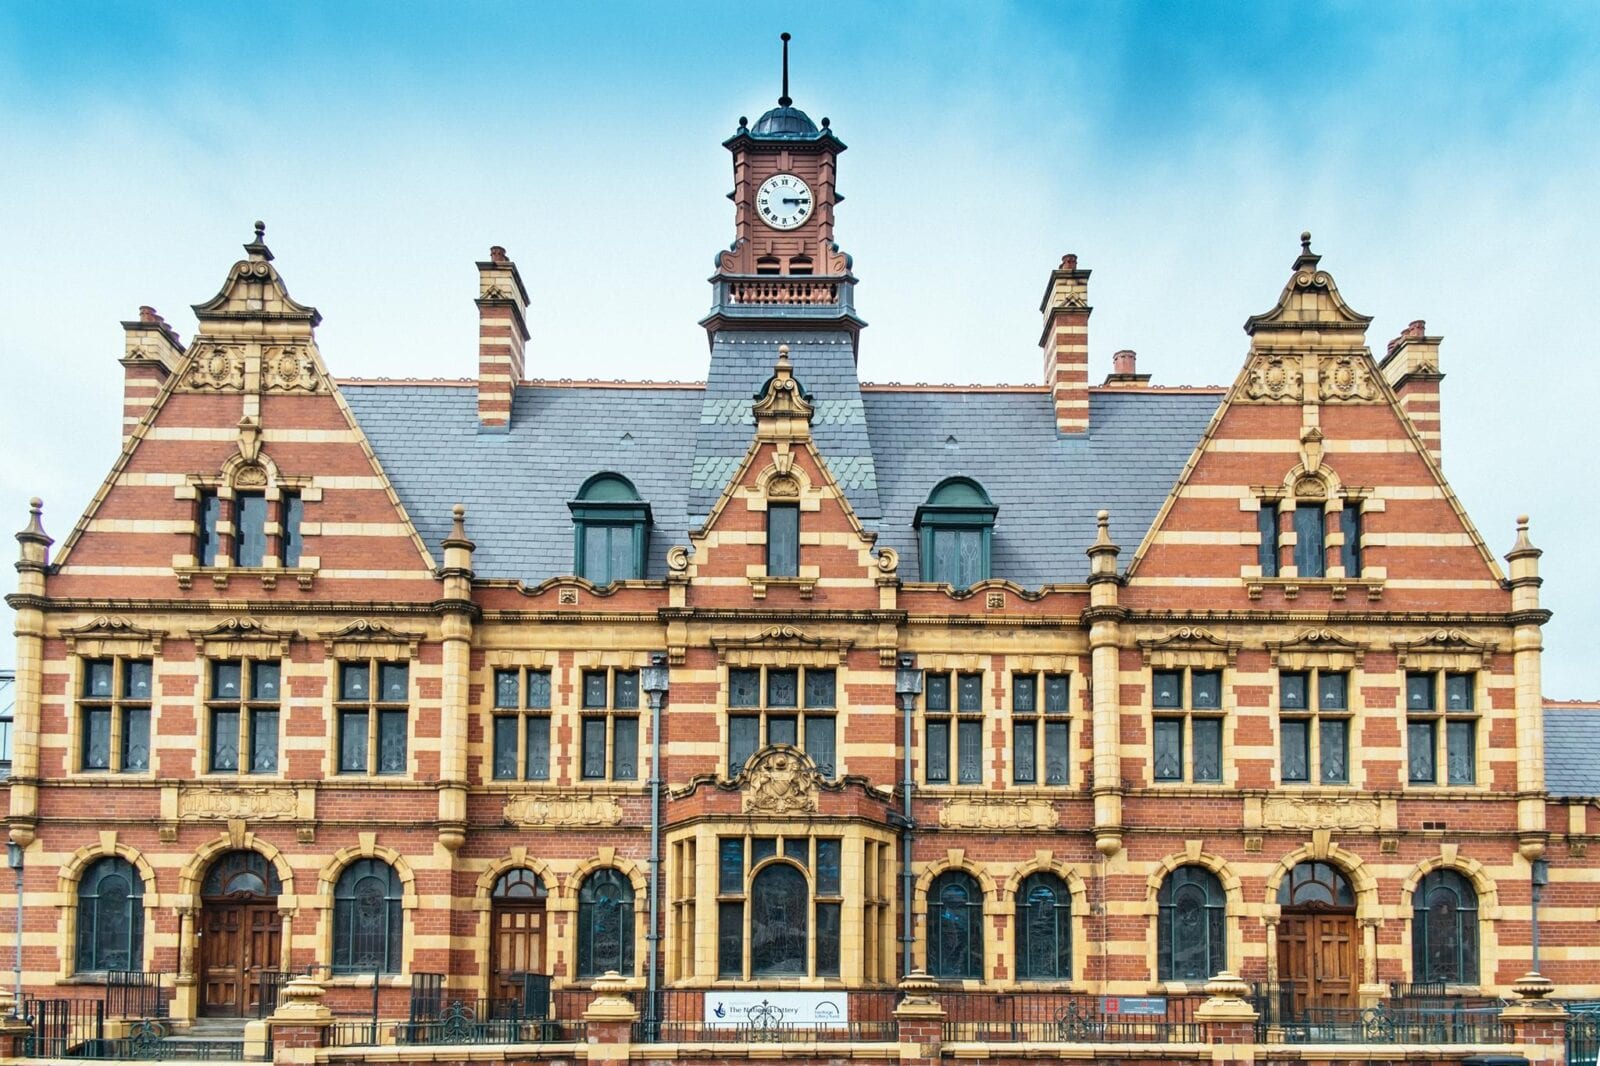 Victoria Baths is reopening its doors for a Festive Winter Fair next month, The Manc